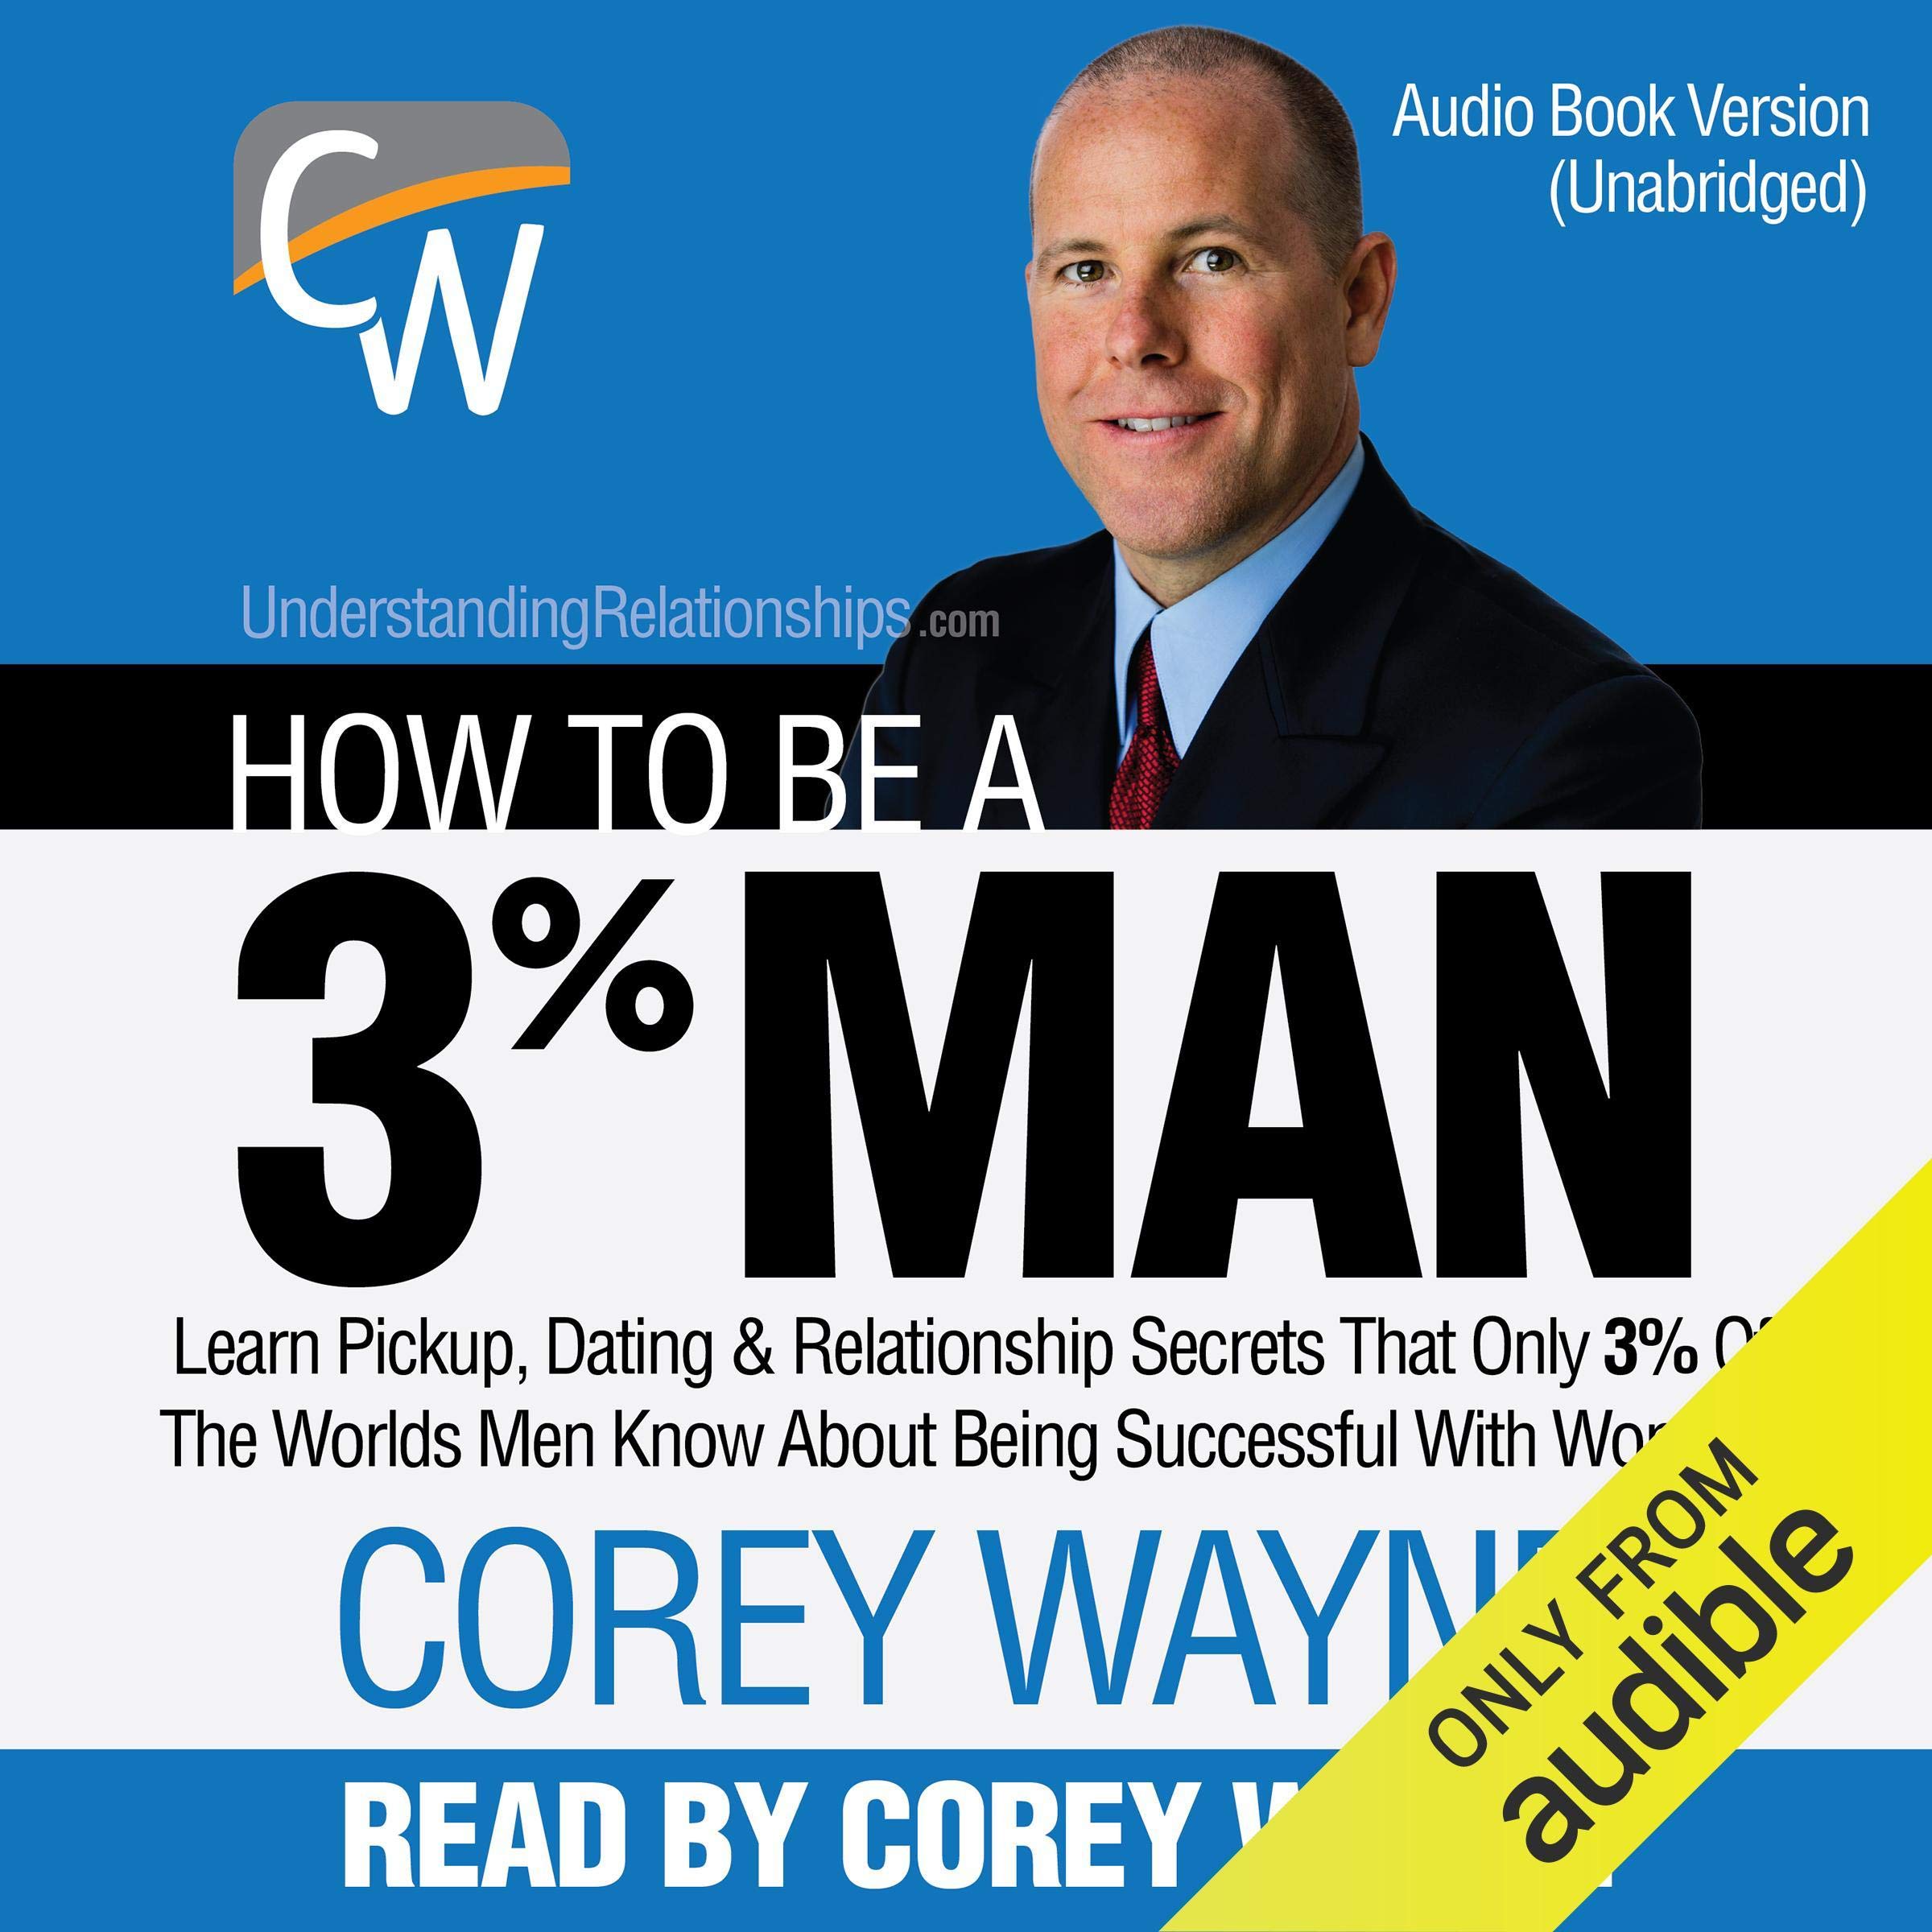 How to Be a 3% Man